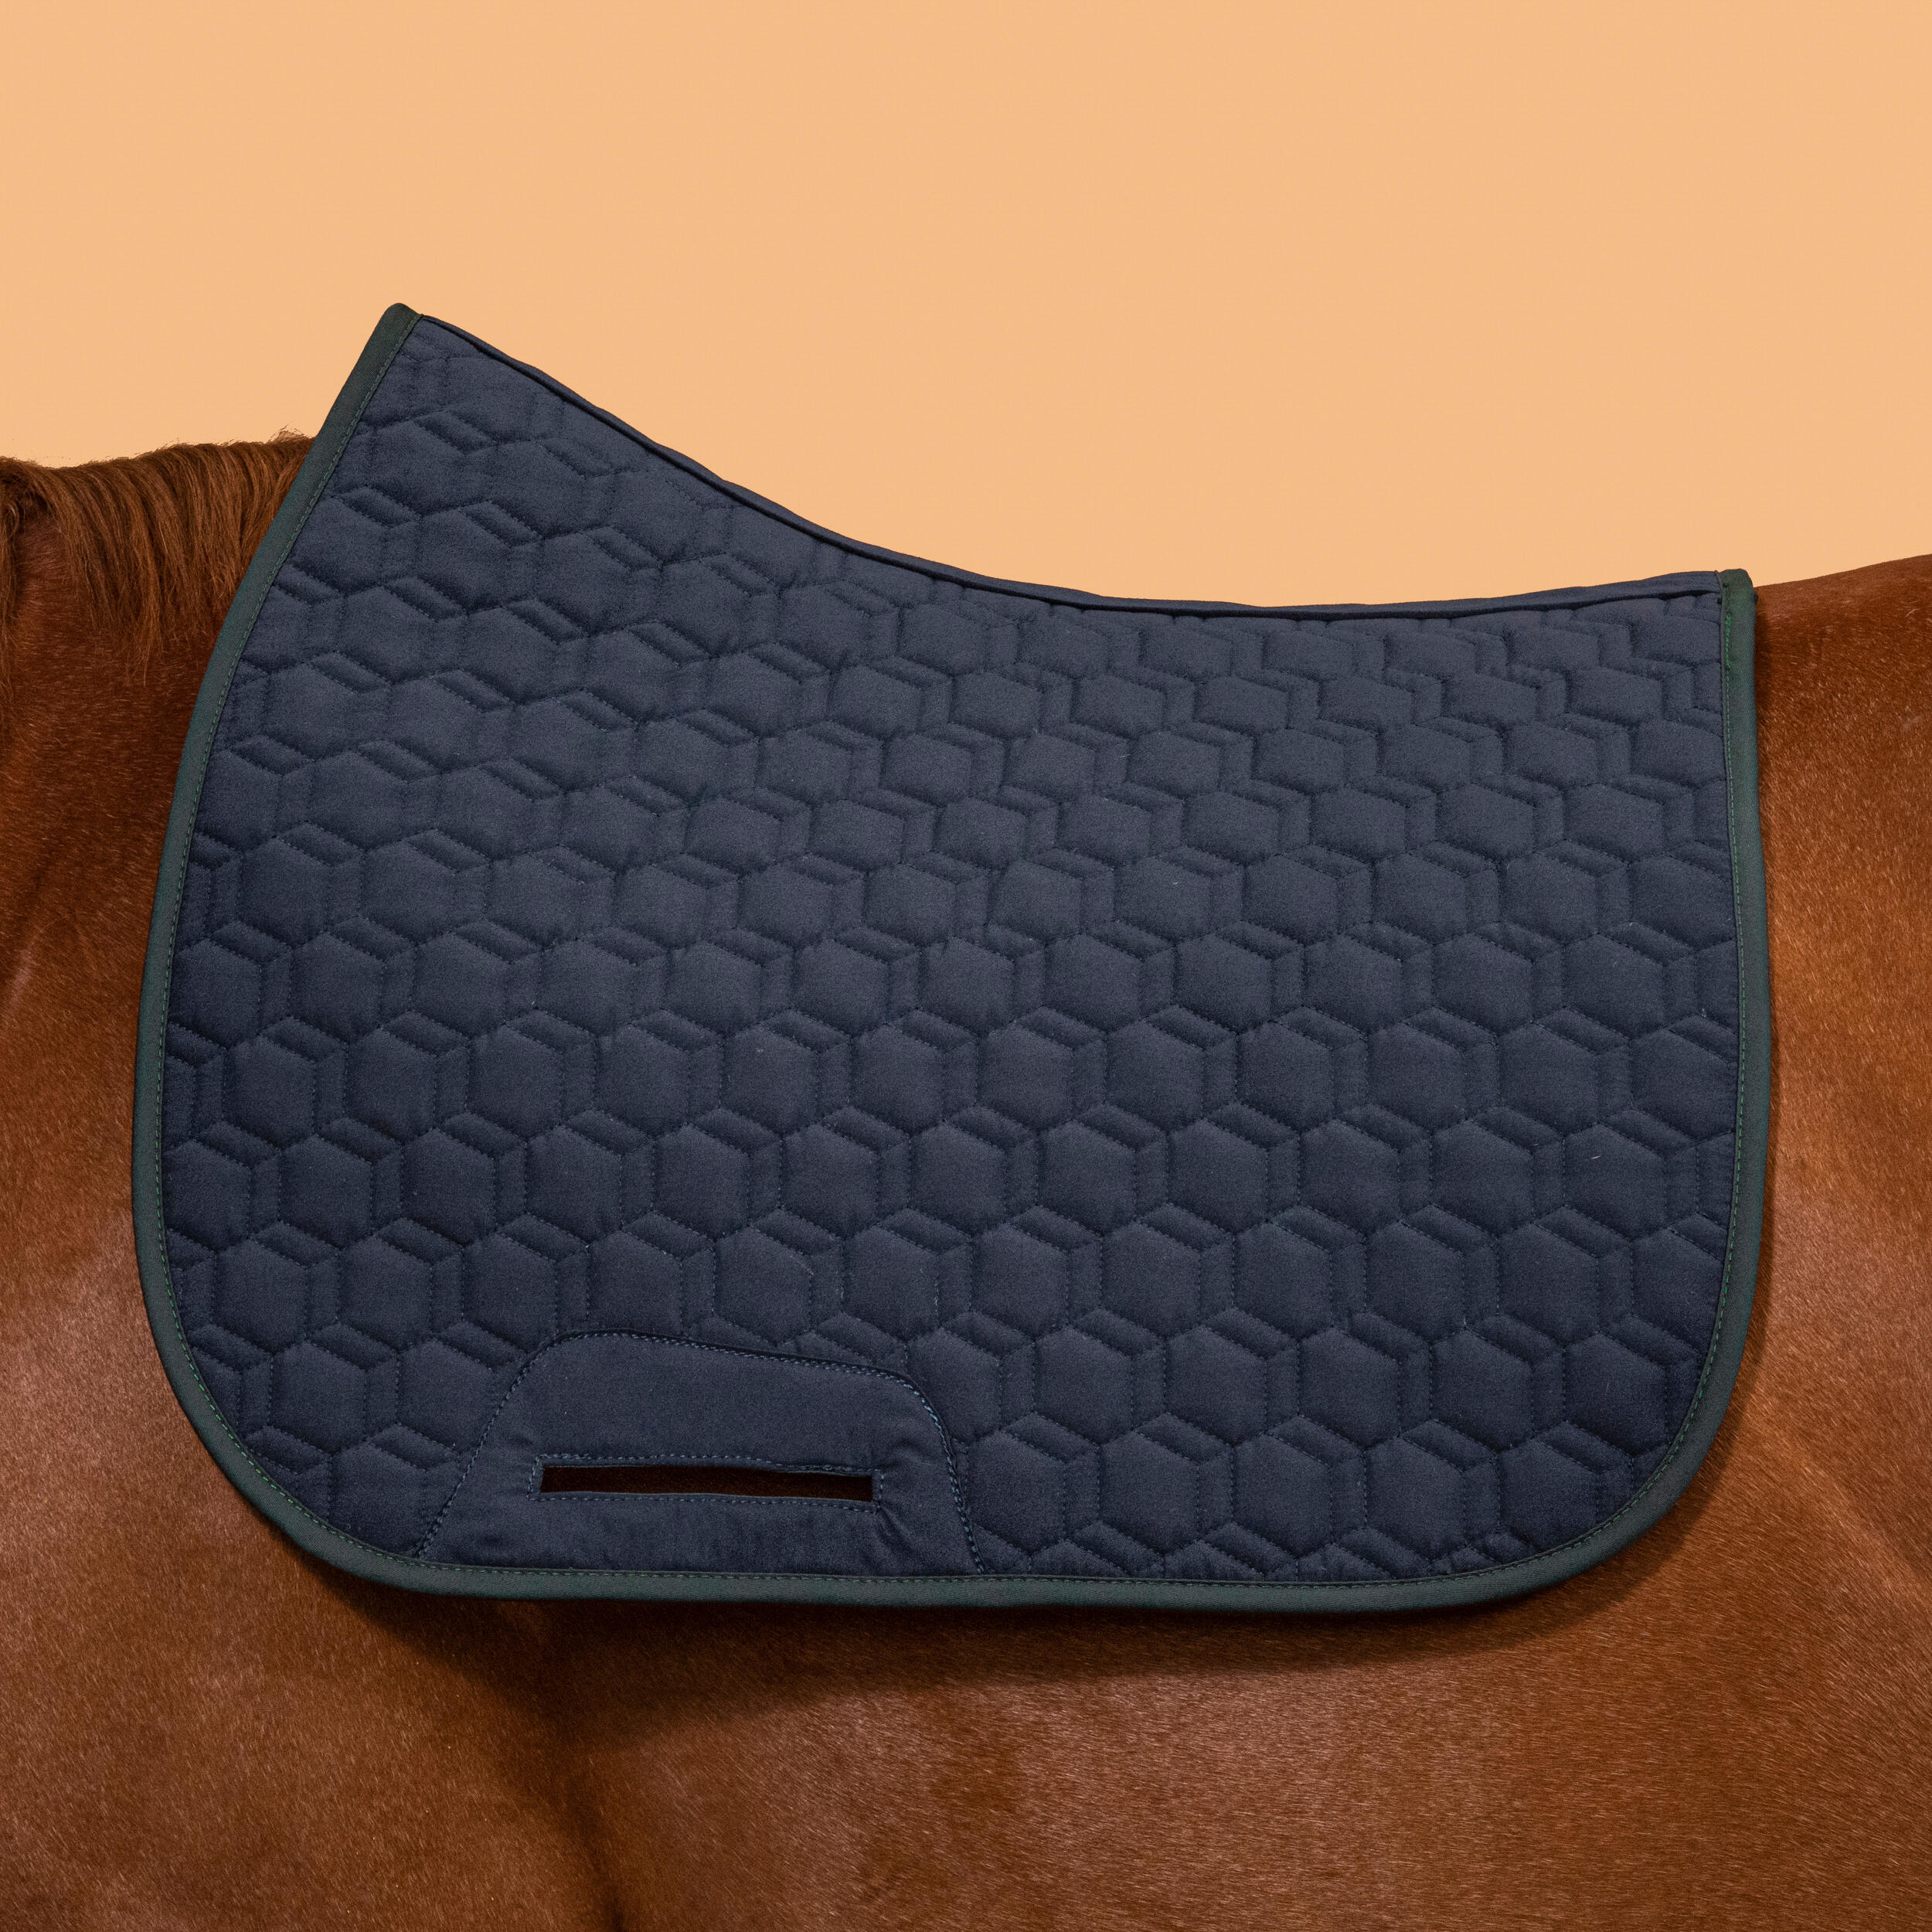 Horse Riding Reversible Saddle Cloth For Horse and Pony 500 - Navy/Green 6/9